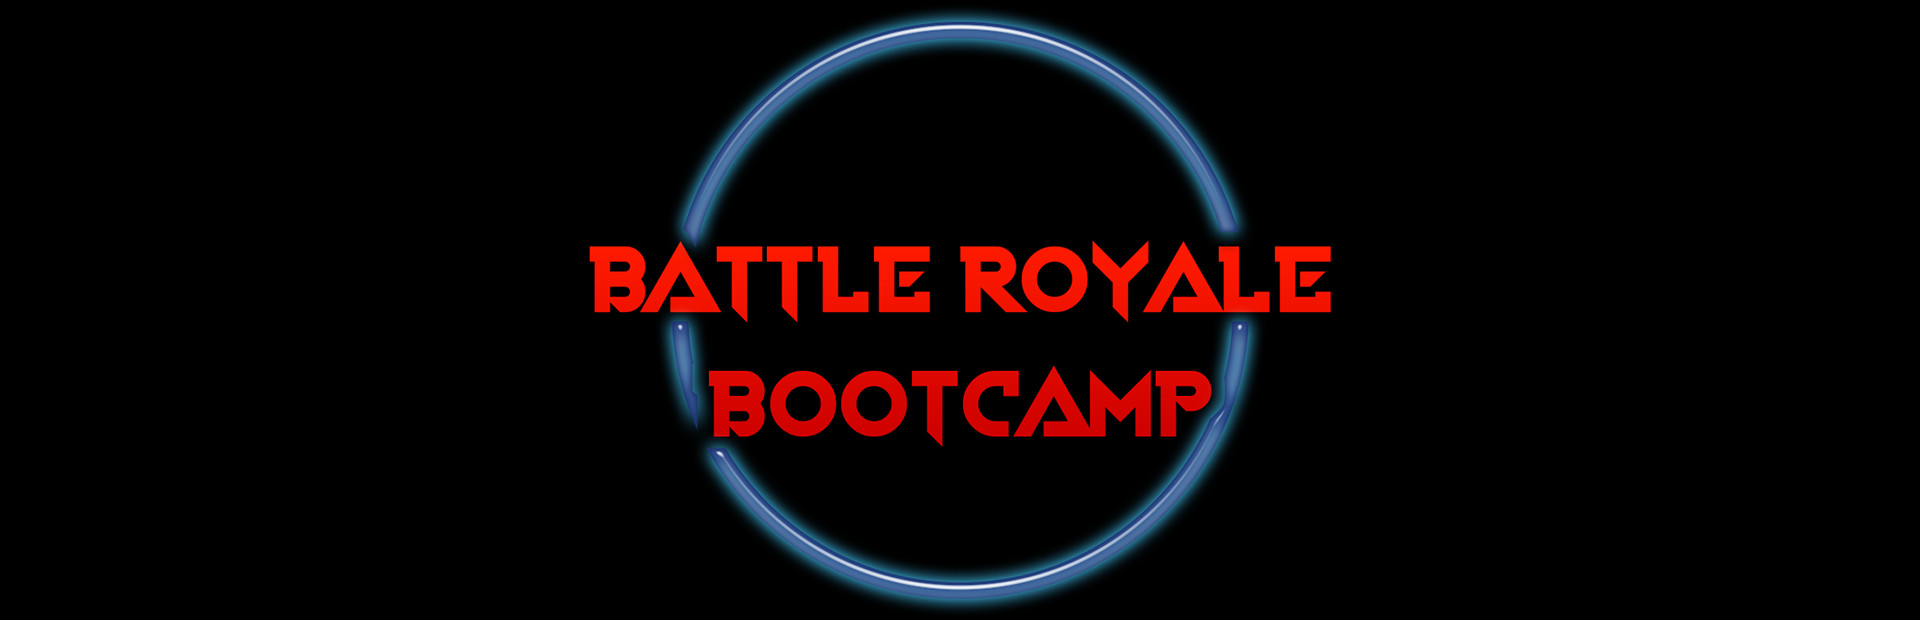 Battle Royale Bootcamp cover image